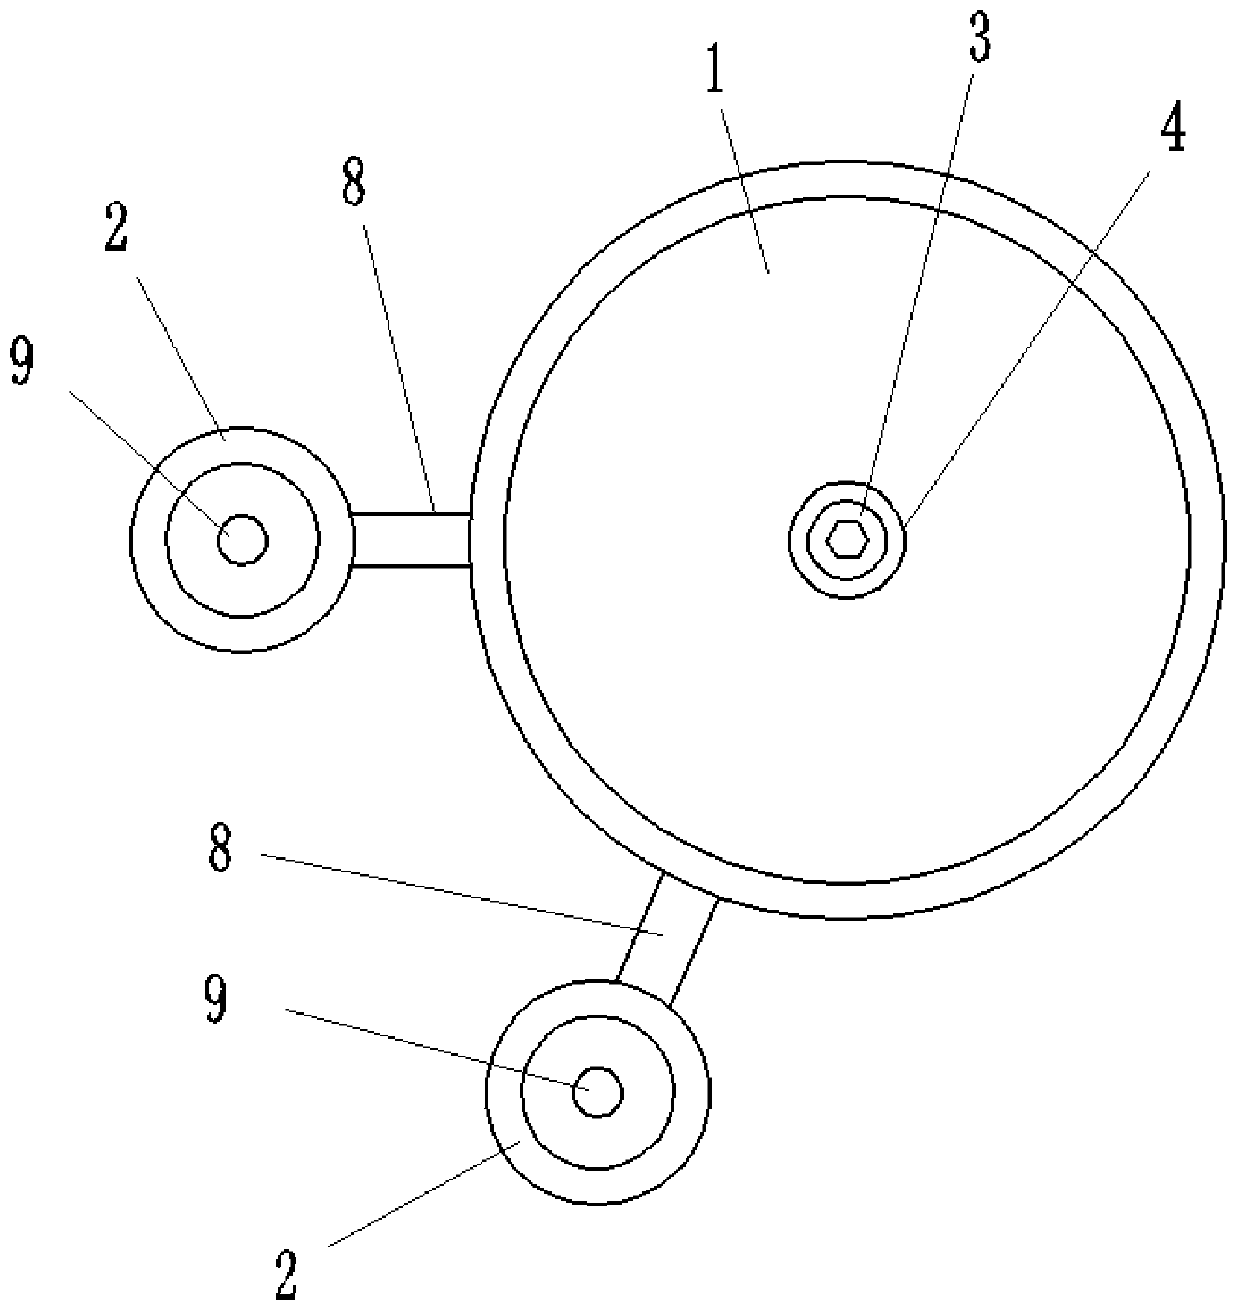 A guide wheel replacement device